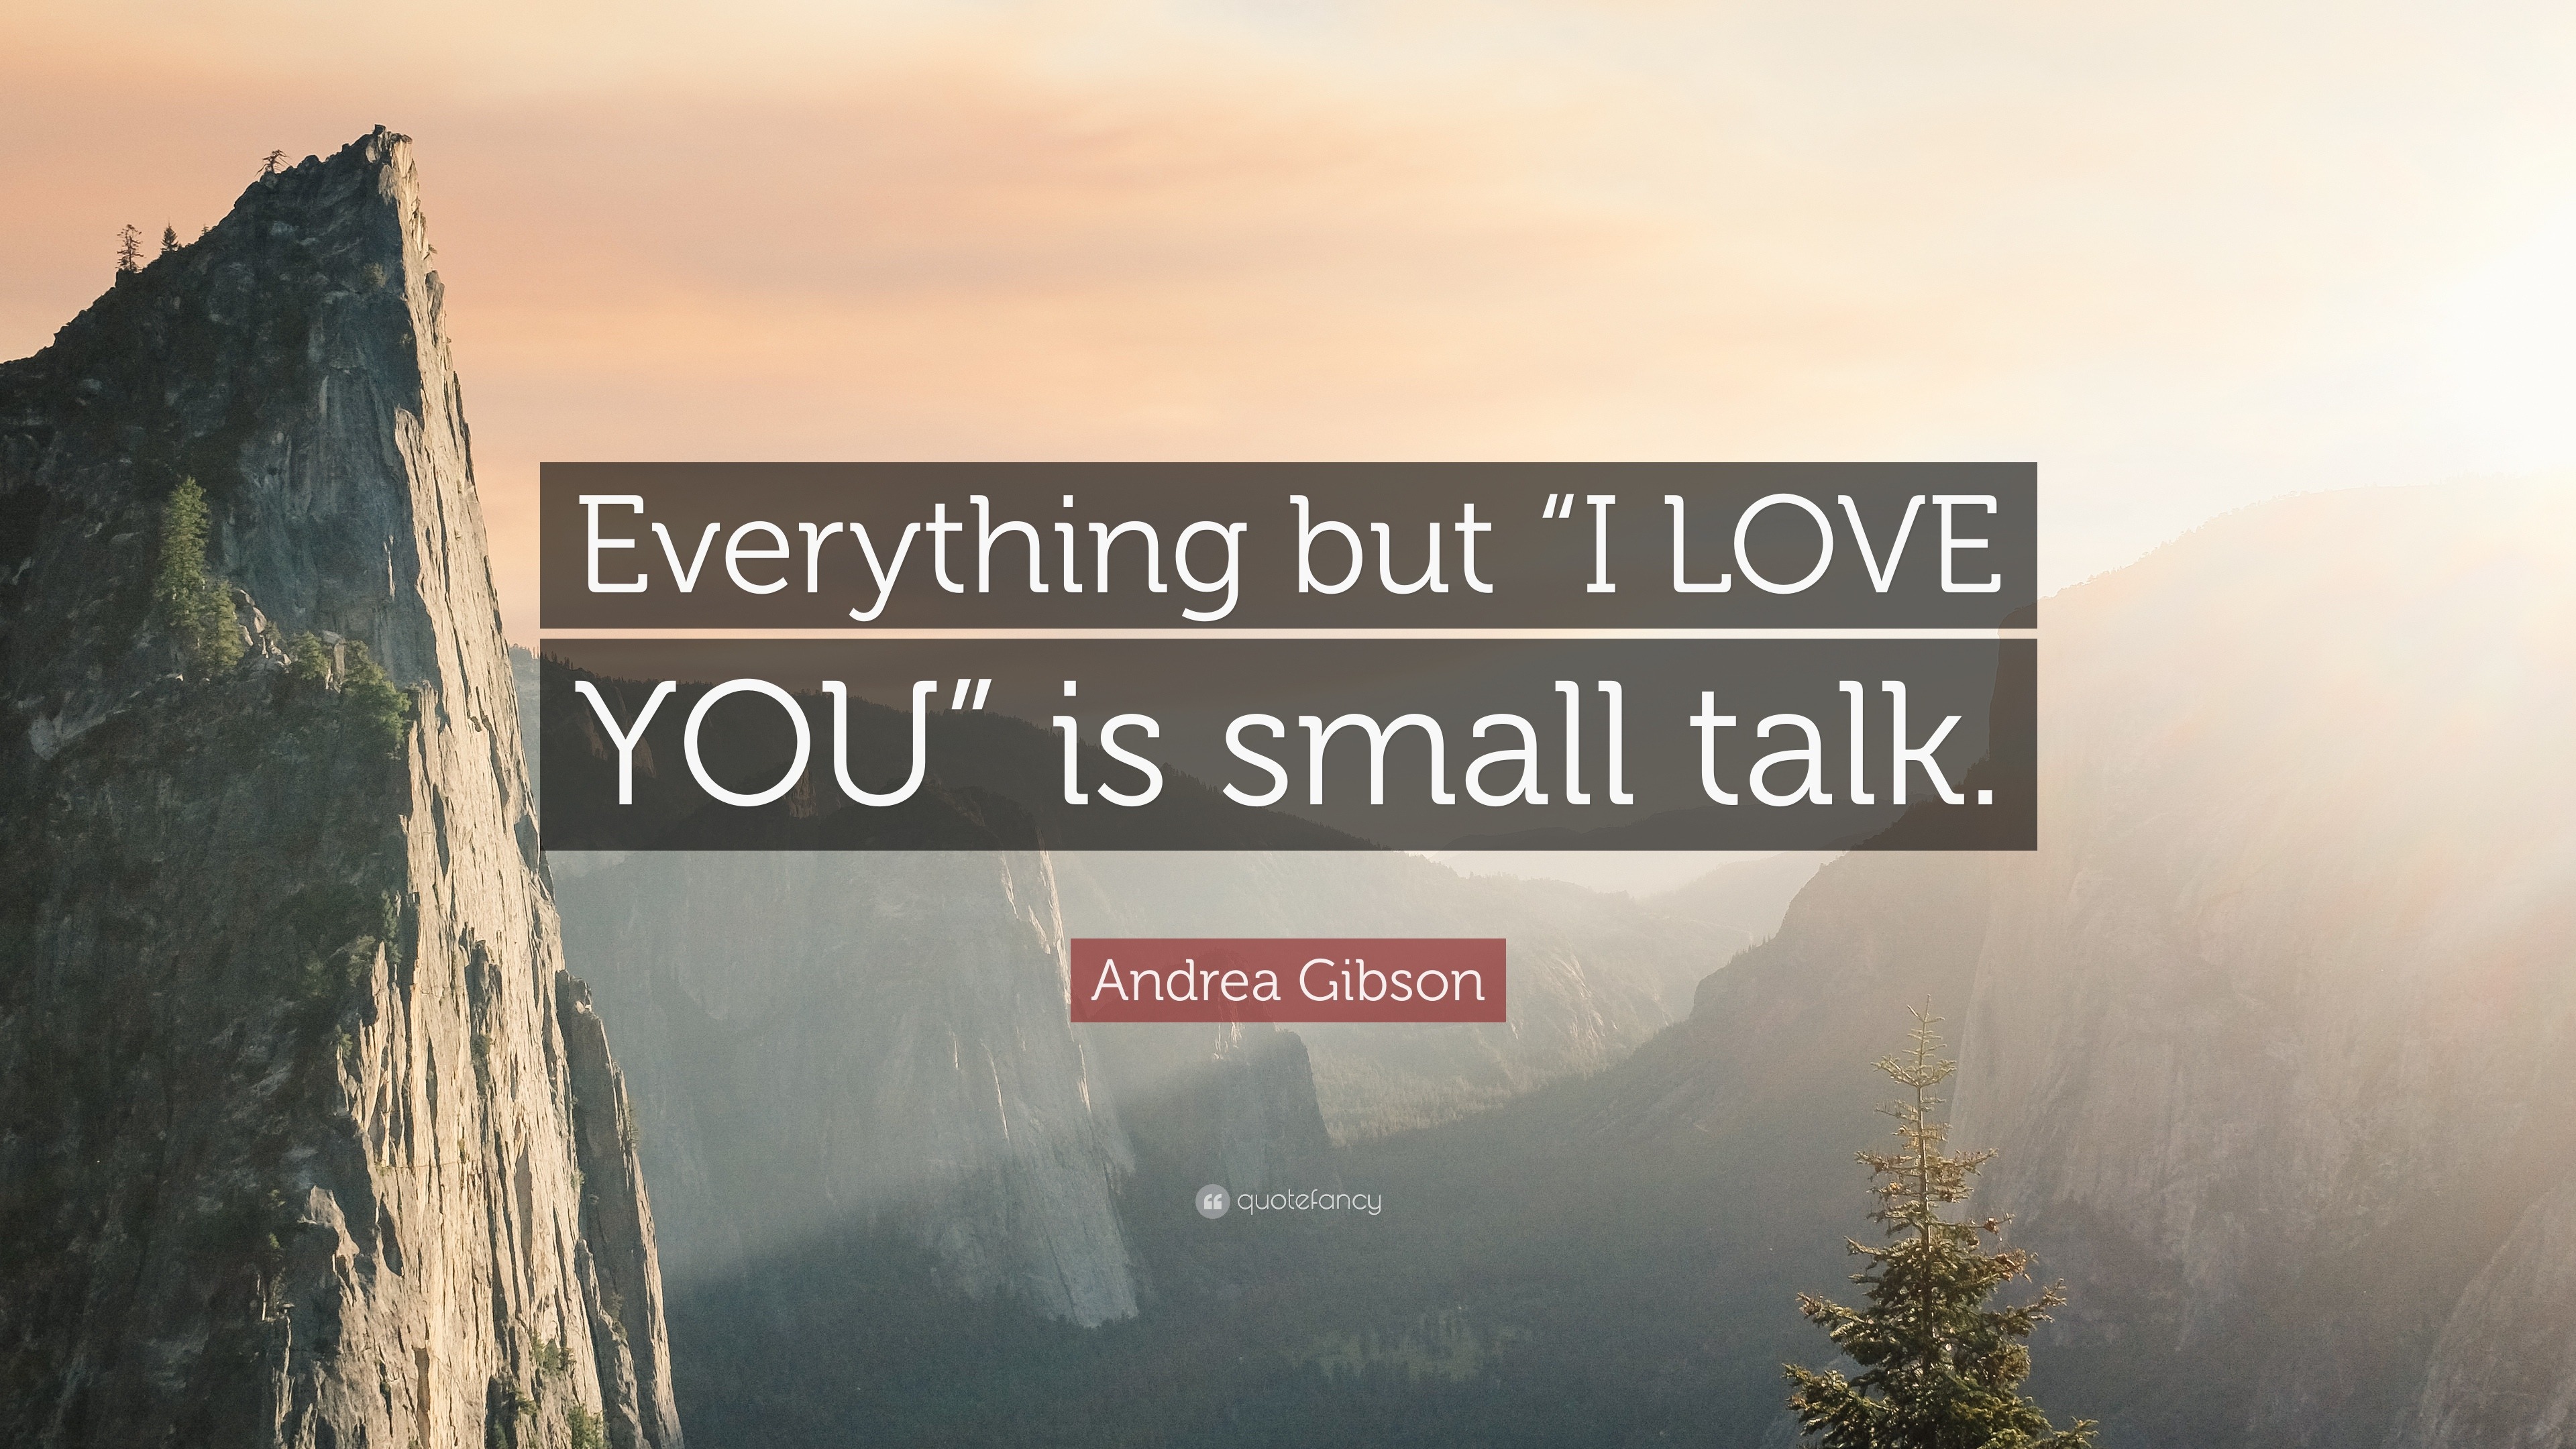 Andrea Gibson Quote “Everything but “I LOVE YOU” is small